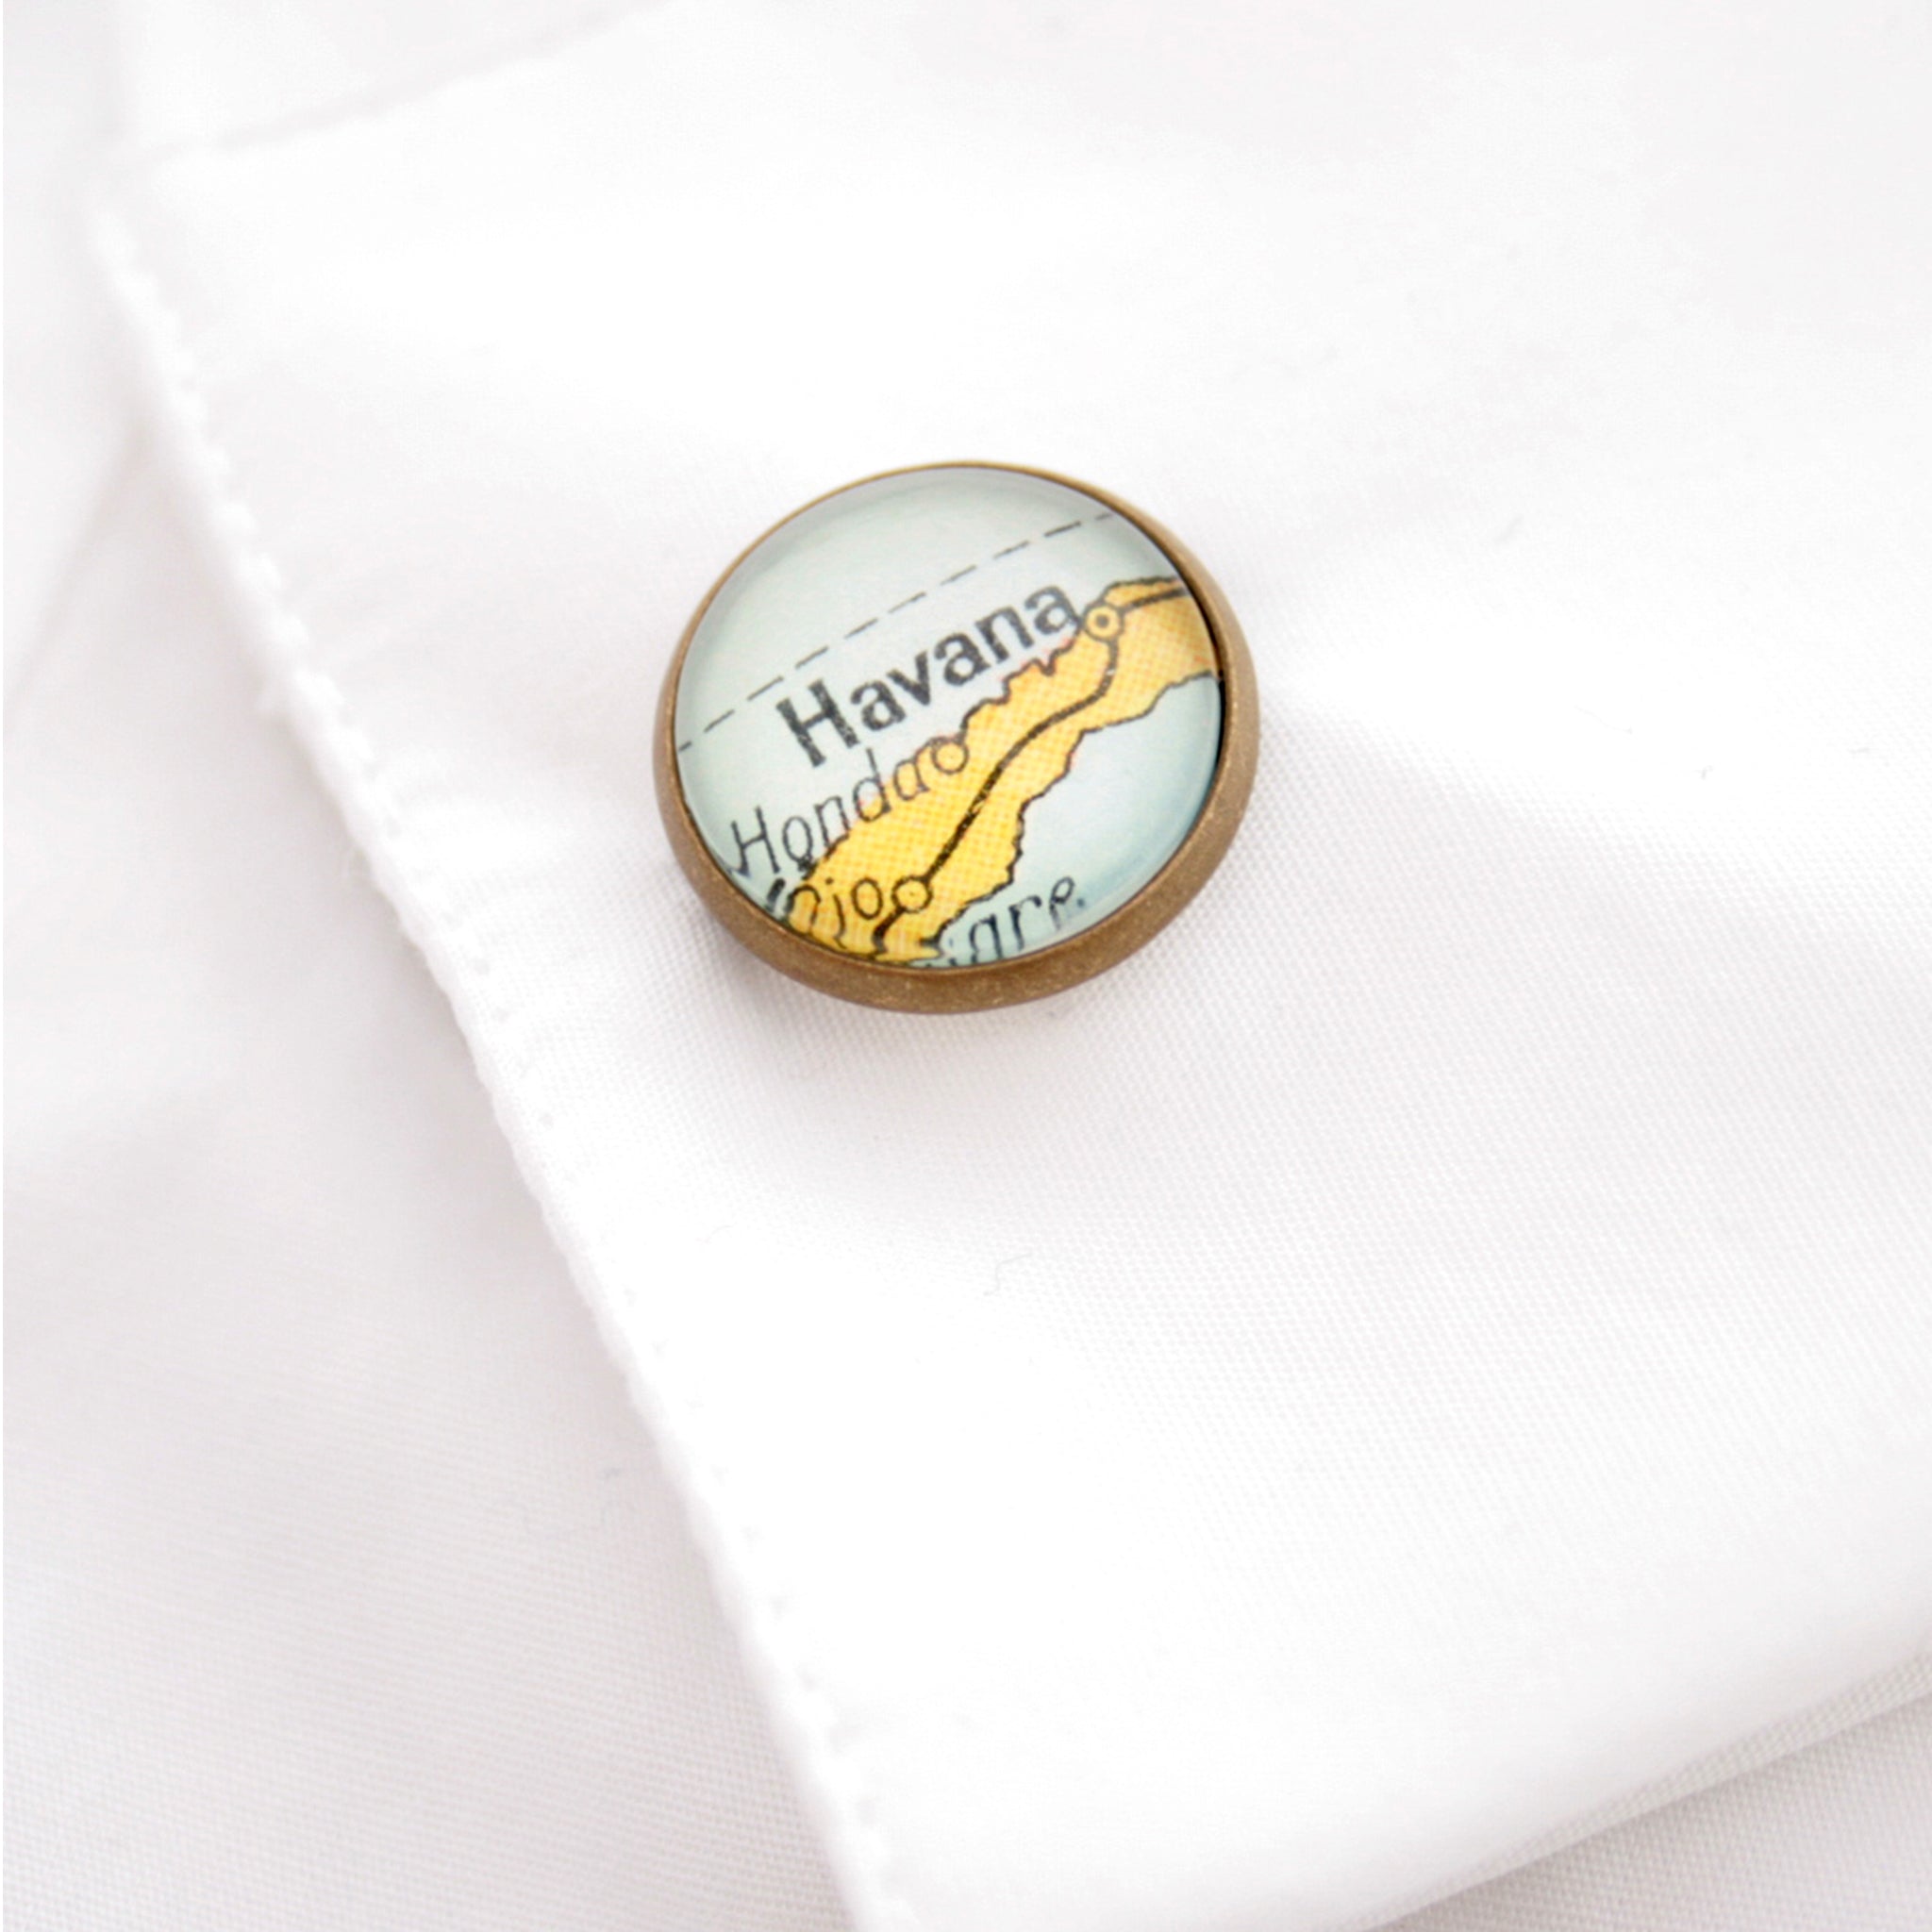 Personalised map cufflinks in bronze color in shirts cuff